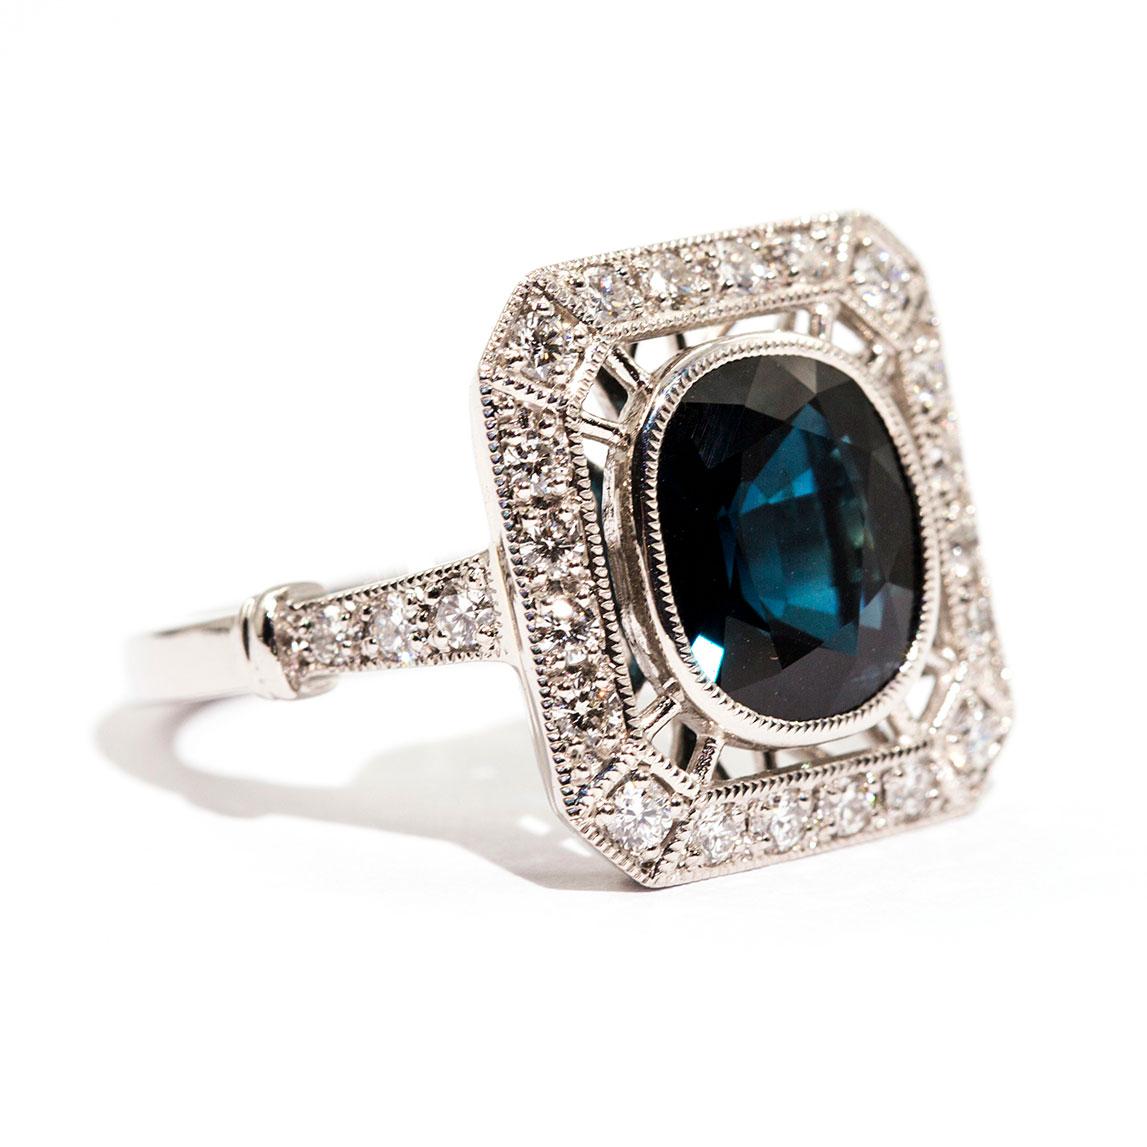 Forged in platinum, this fabulous art deco inspired ring features an enchanting 3.97 carat cushion cut natural deep blue sapphire. This spectacular gem is encompassed by 0.64 carats of radiant round brilliant cut diamonds. We have named this